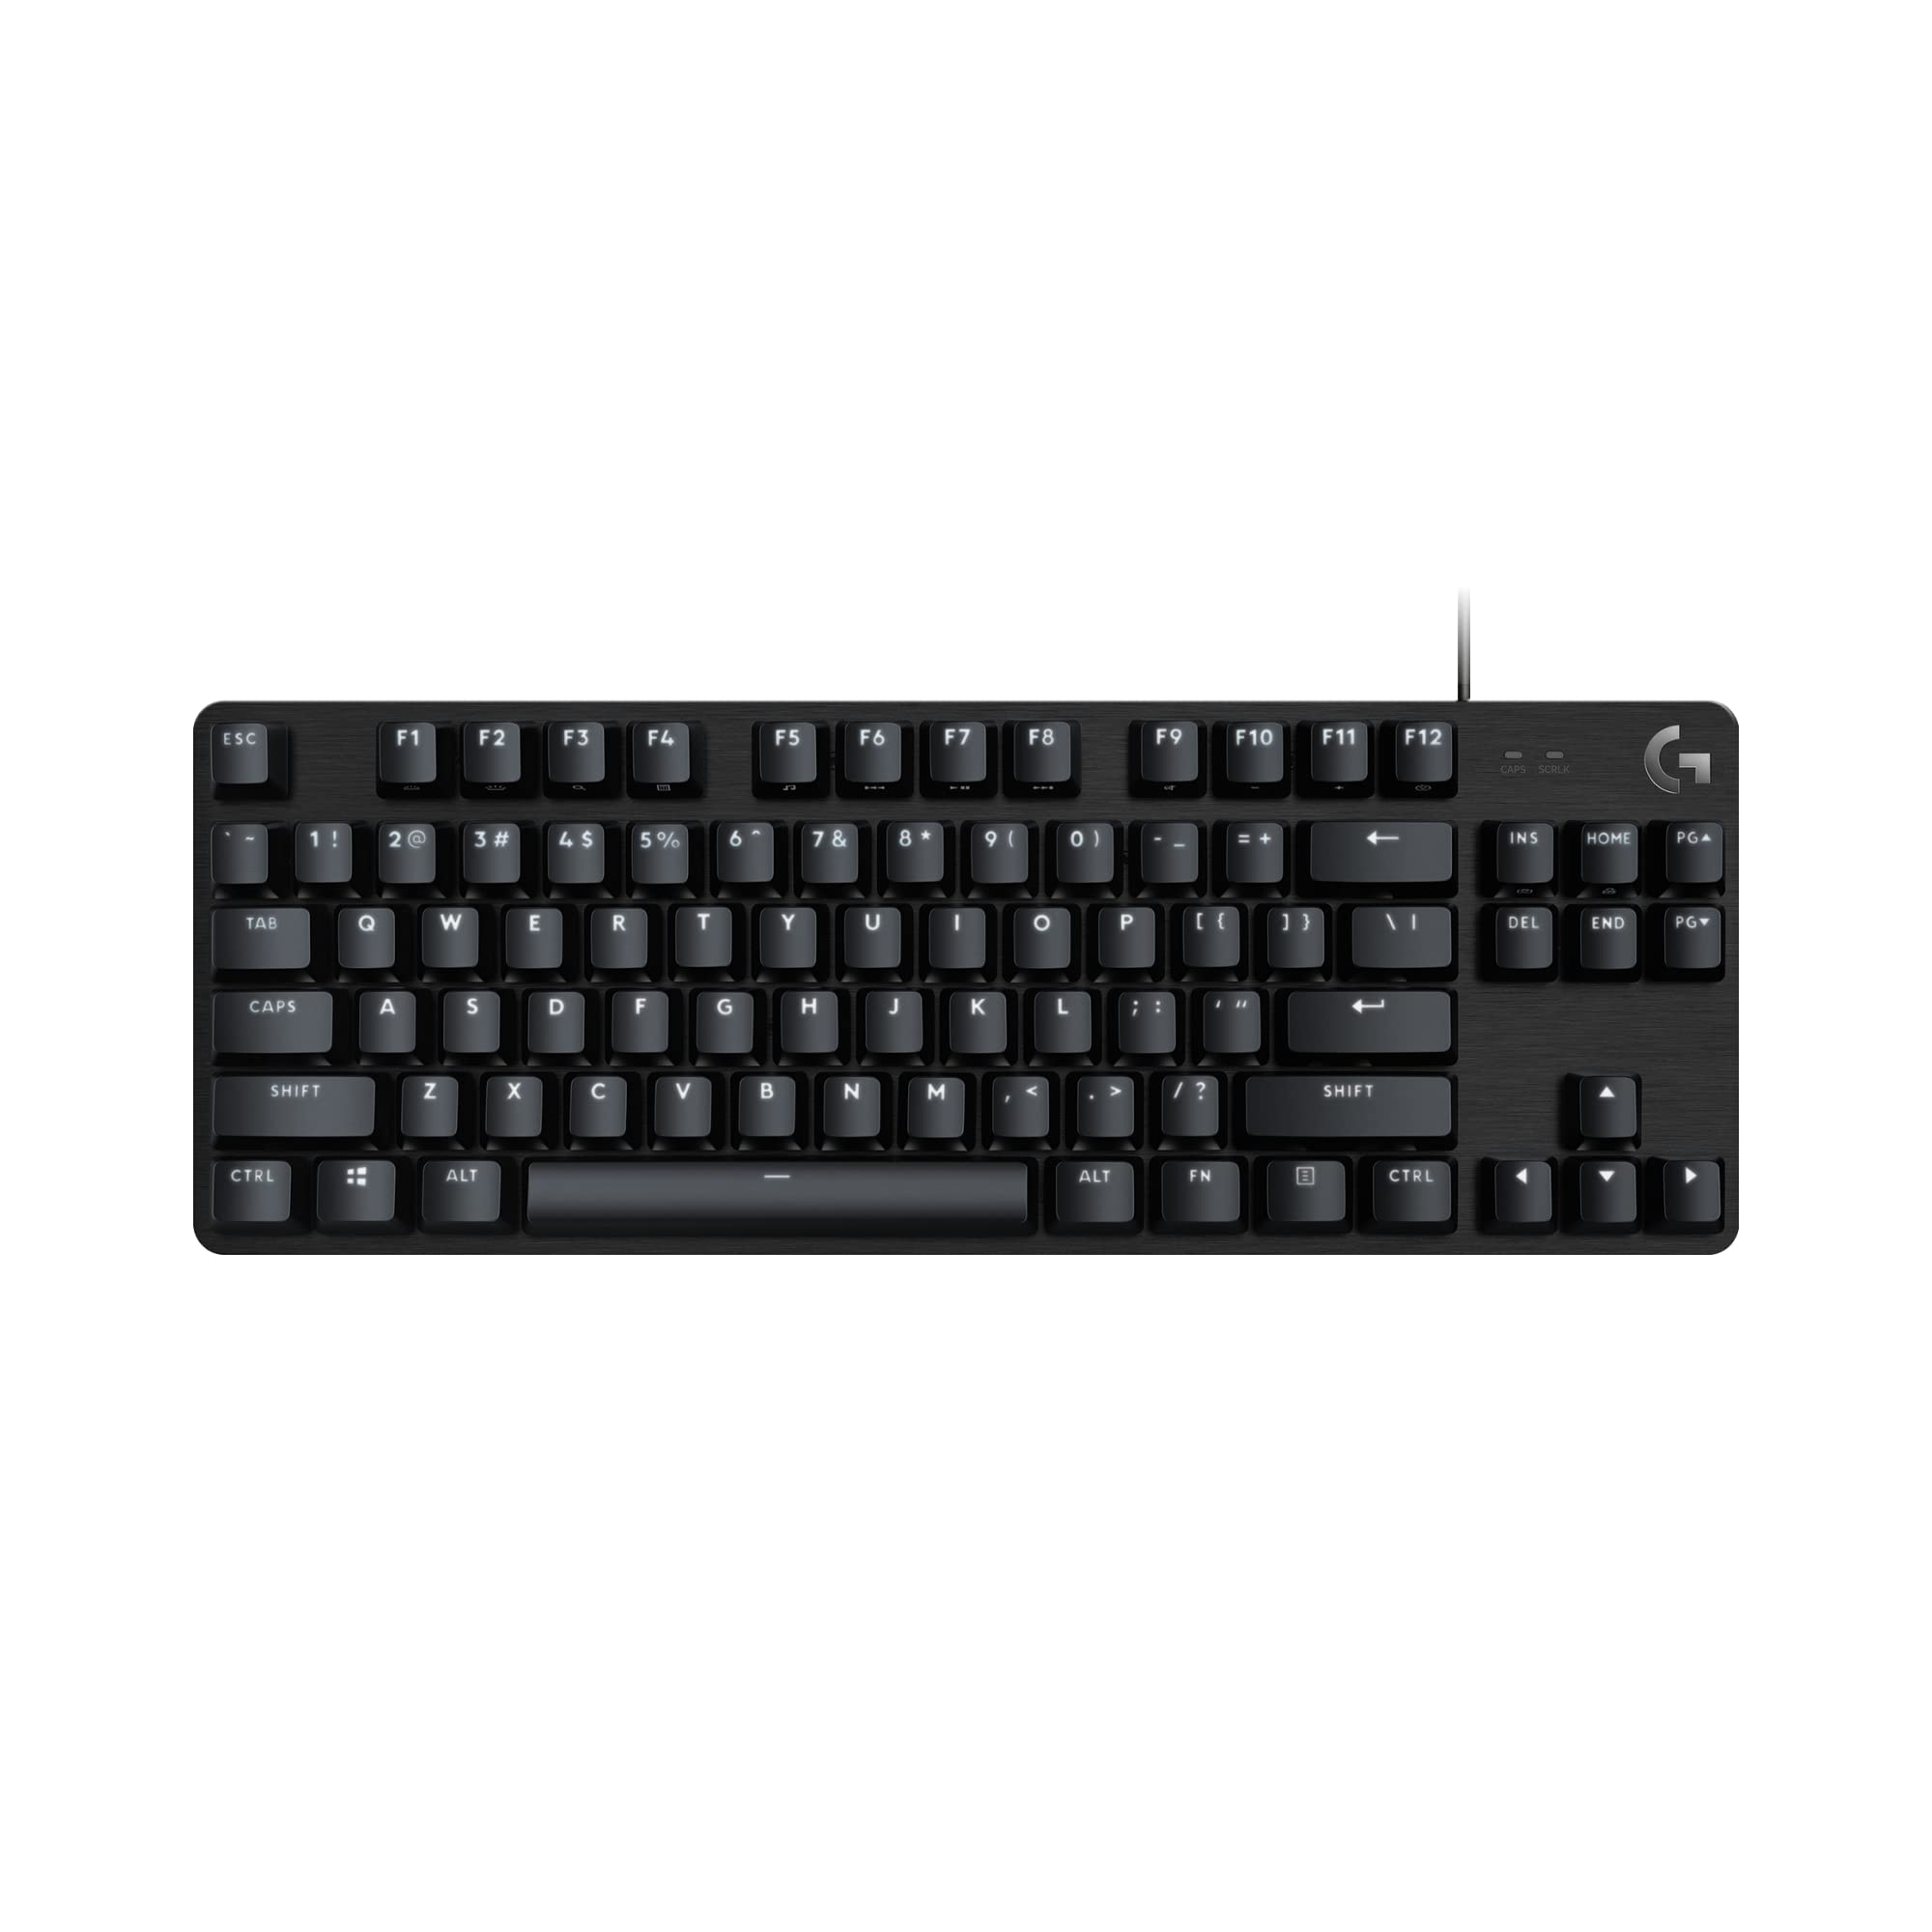 Logitech G413 TKL SE Mechanical Gaming Keyboard - Compact Backlit Keyboard with Tactile Switches, Anti-Ghosting, Compatible with Windows, macOS - Black Aluminum $44.99 @ Amazon